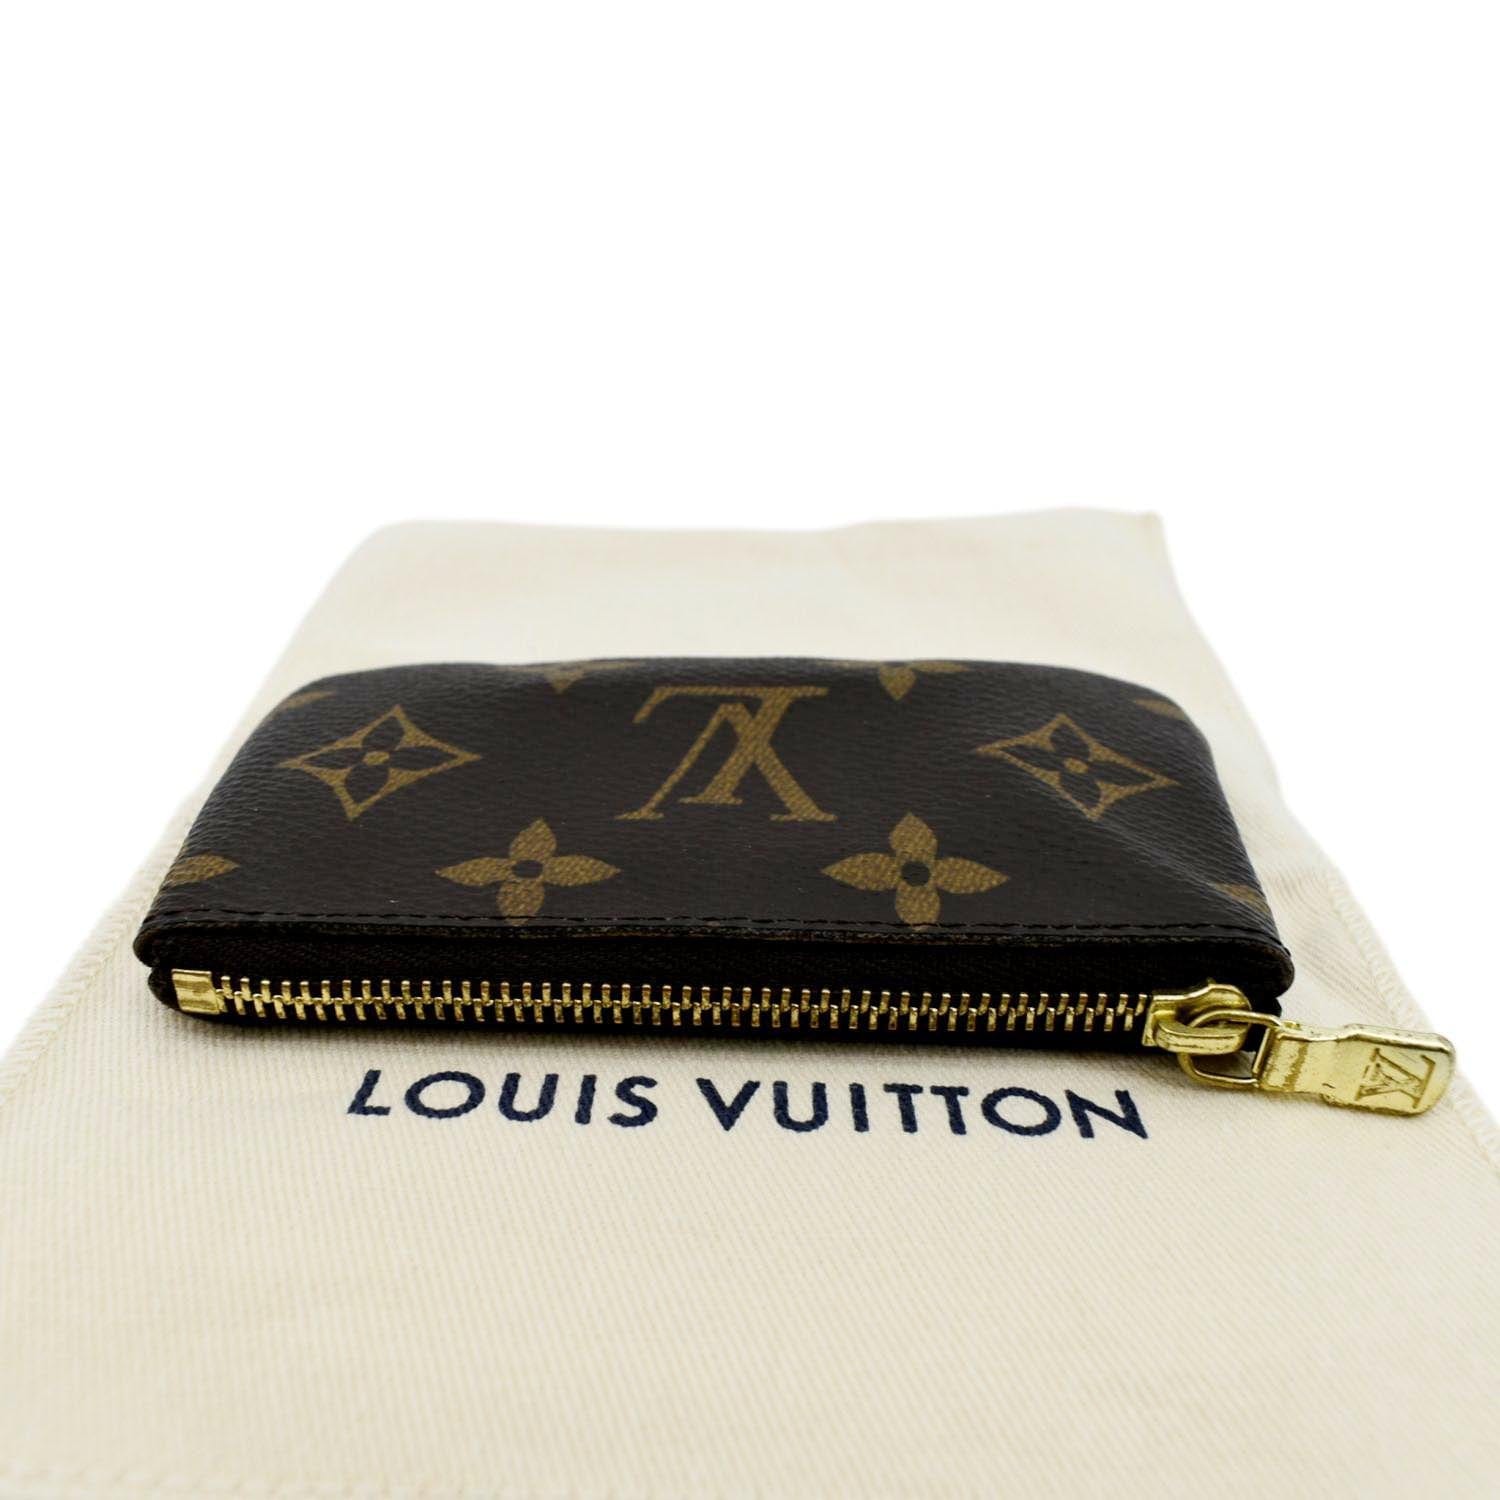 Shop Louis Vuitton MONOGRAM Leather Small Wallet Coin Cases by